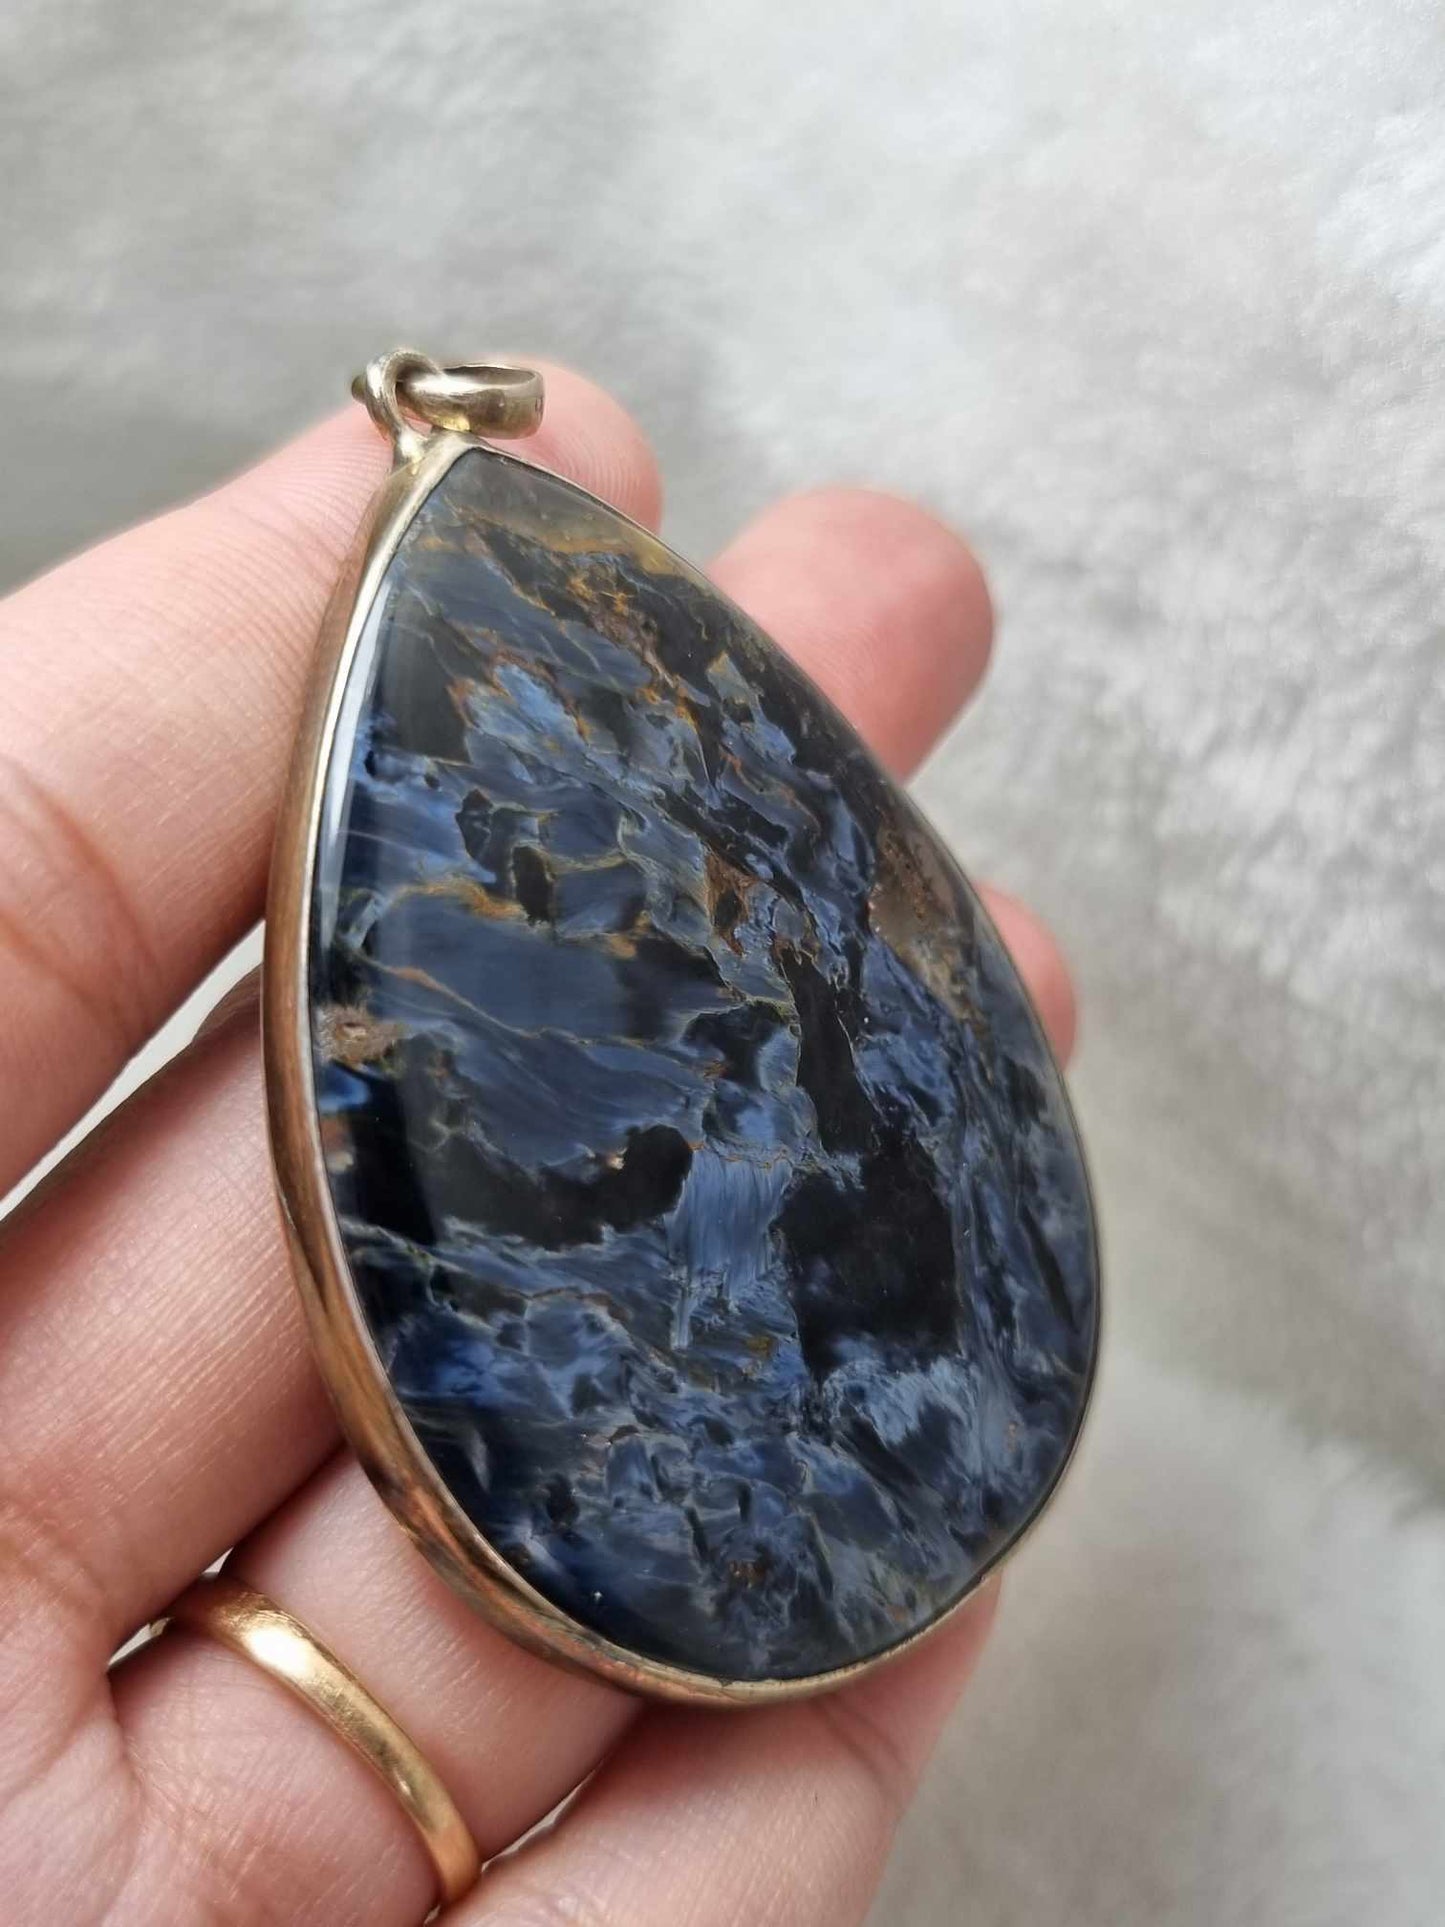 High Quality Pietersite Cabochon Pendant from Namibia known for enhancing intuition